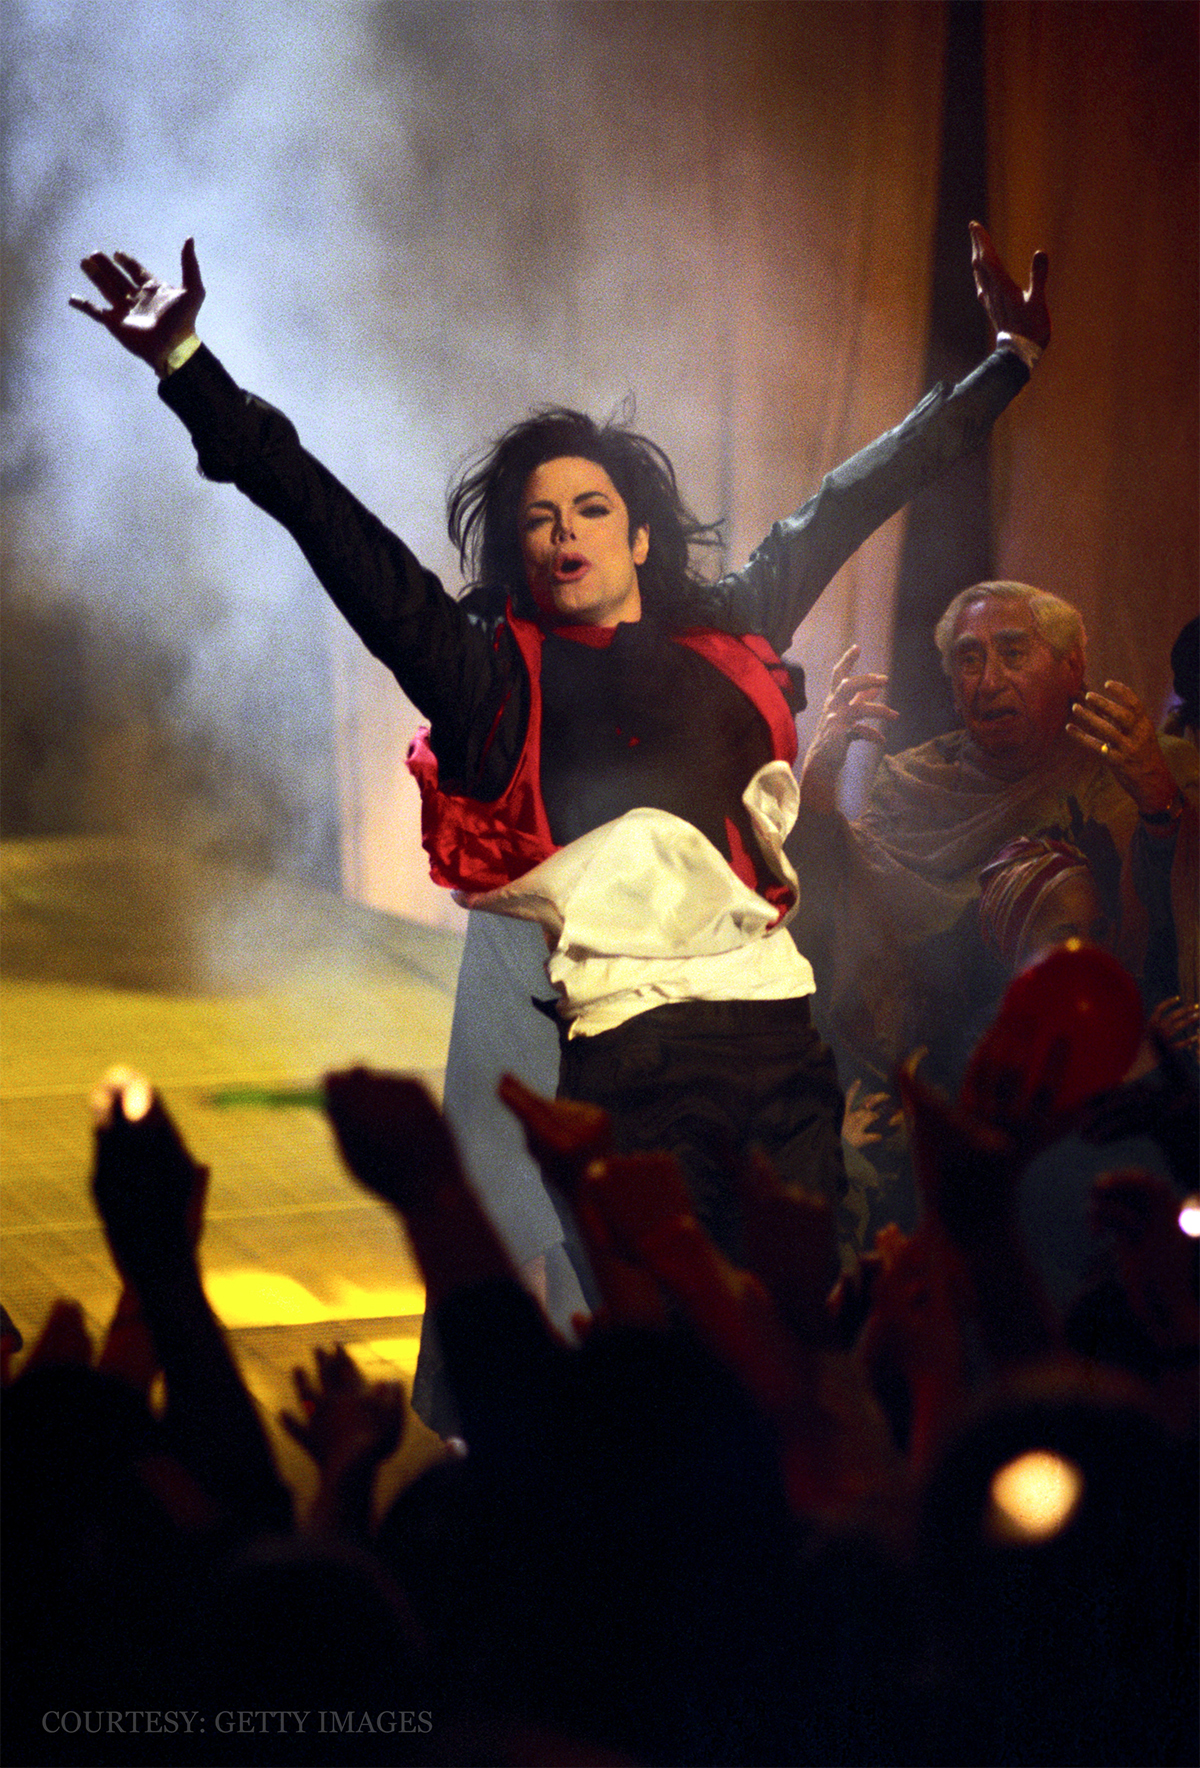 Michael Jackson performs at the BRIT Awards in London's Earls Court on February 19, 1996.